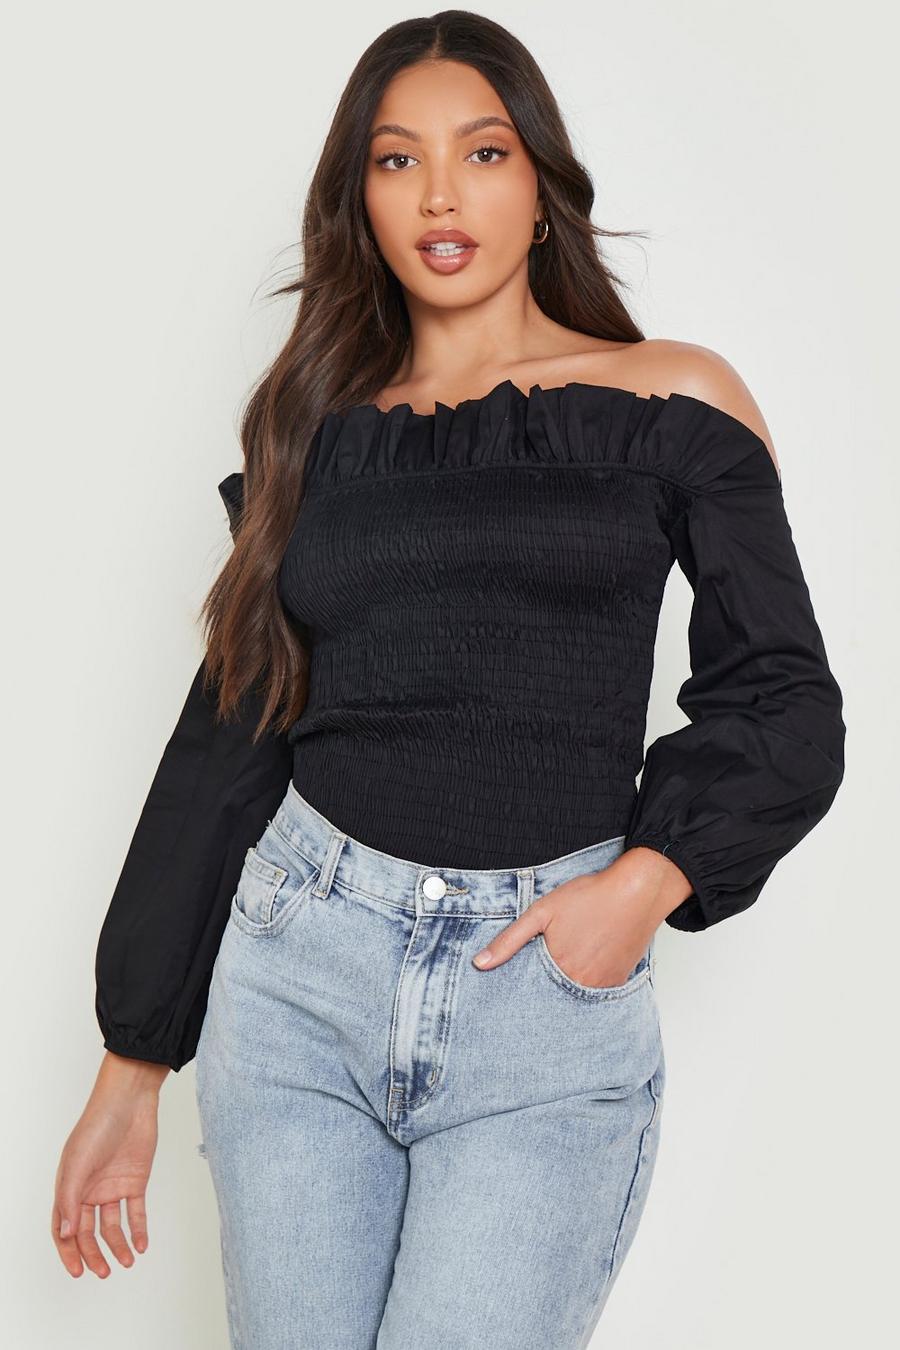 Off-The-Shoulder Tops for Tall Women